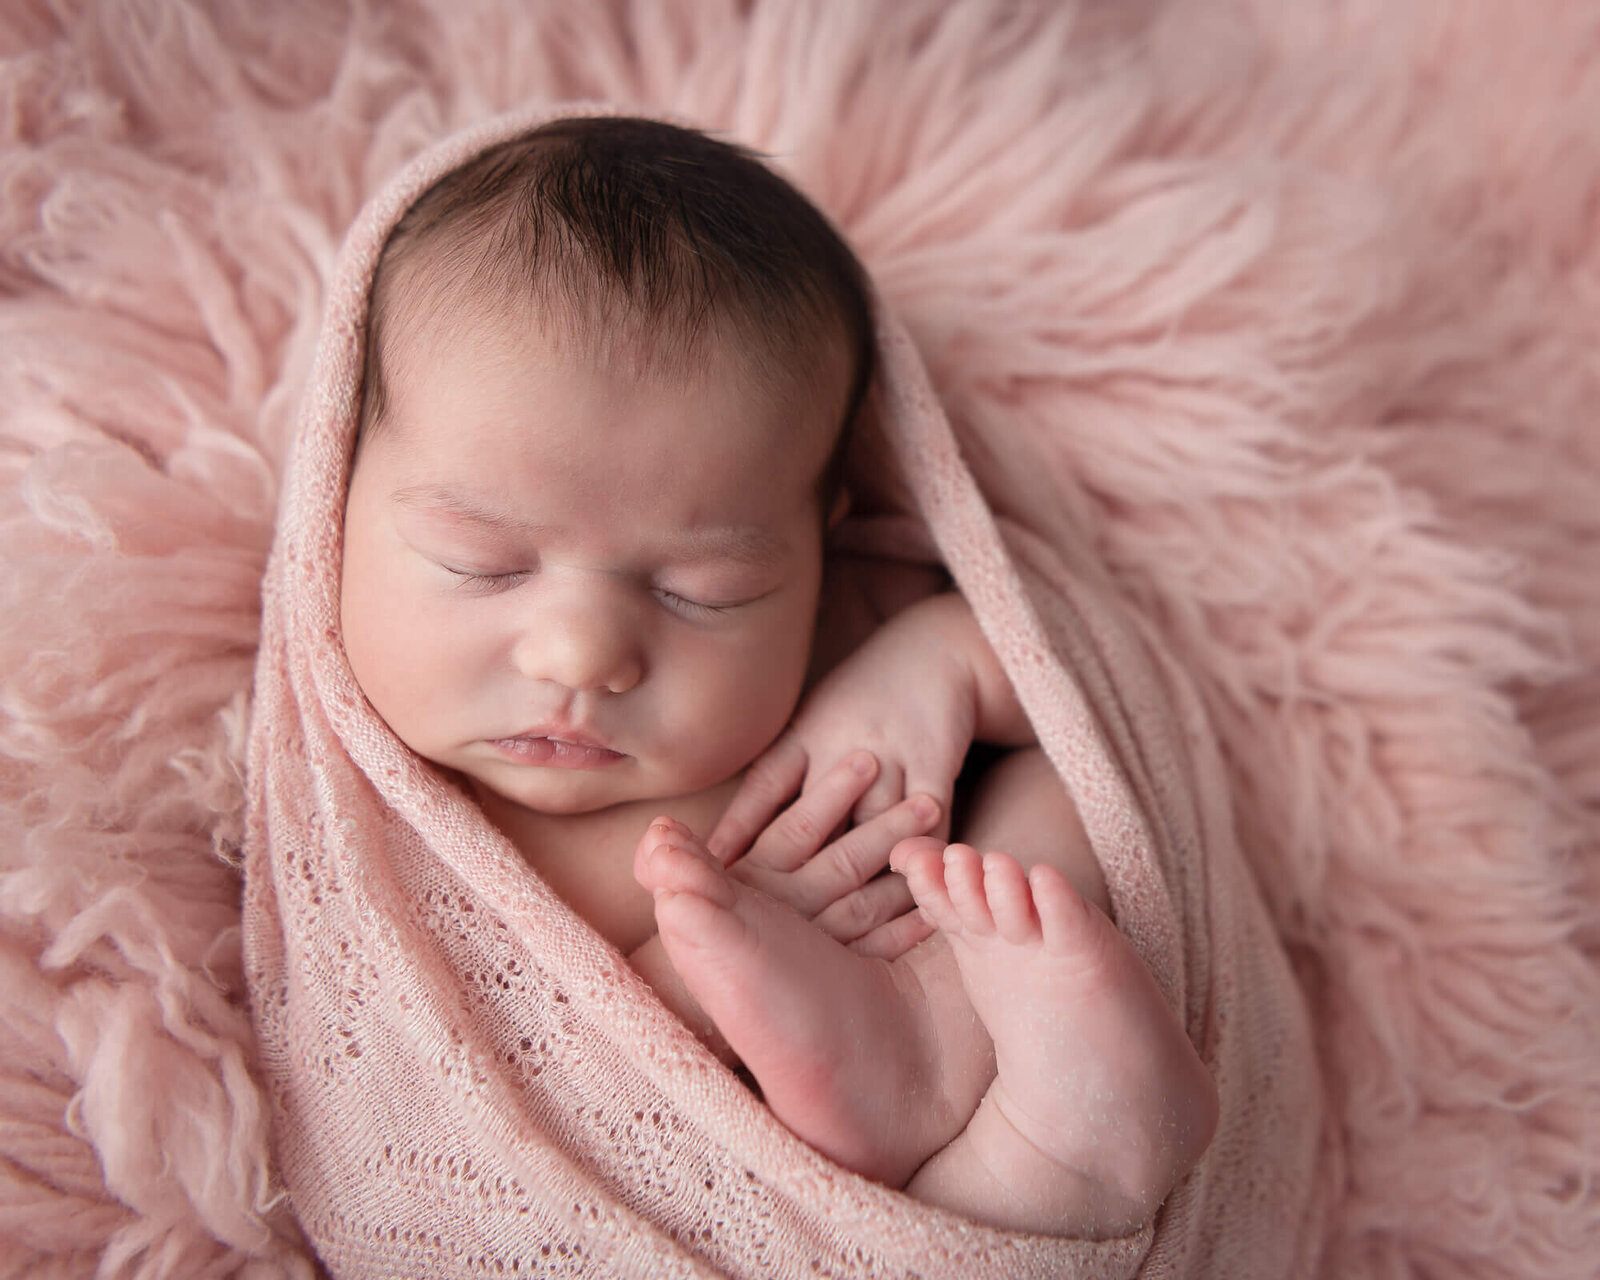 newborn wrapped up in pink